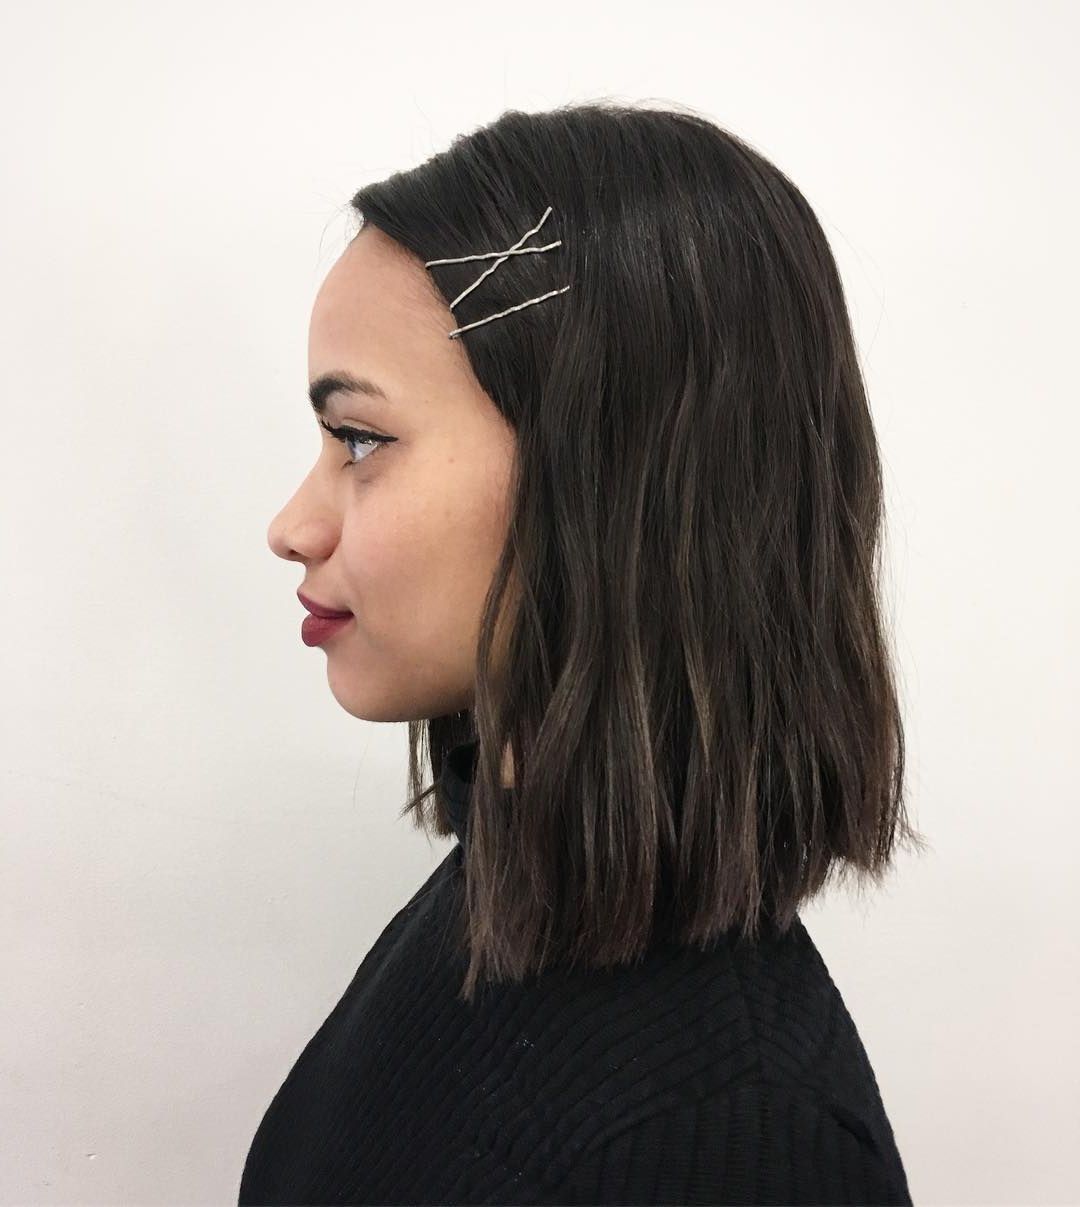 25 Bobby Pin Hairstyles You Haven't Tried But Should | Glamour Intended For Brush Up Hairstyles With Bobby Pins (View 8 of 20)